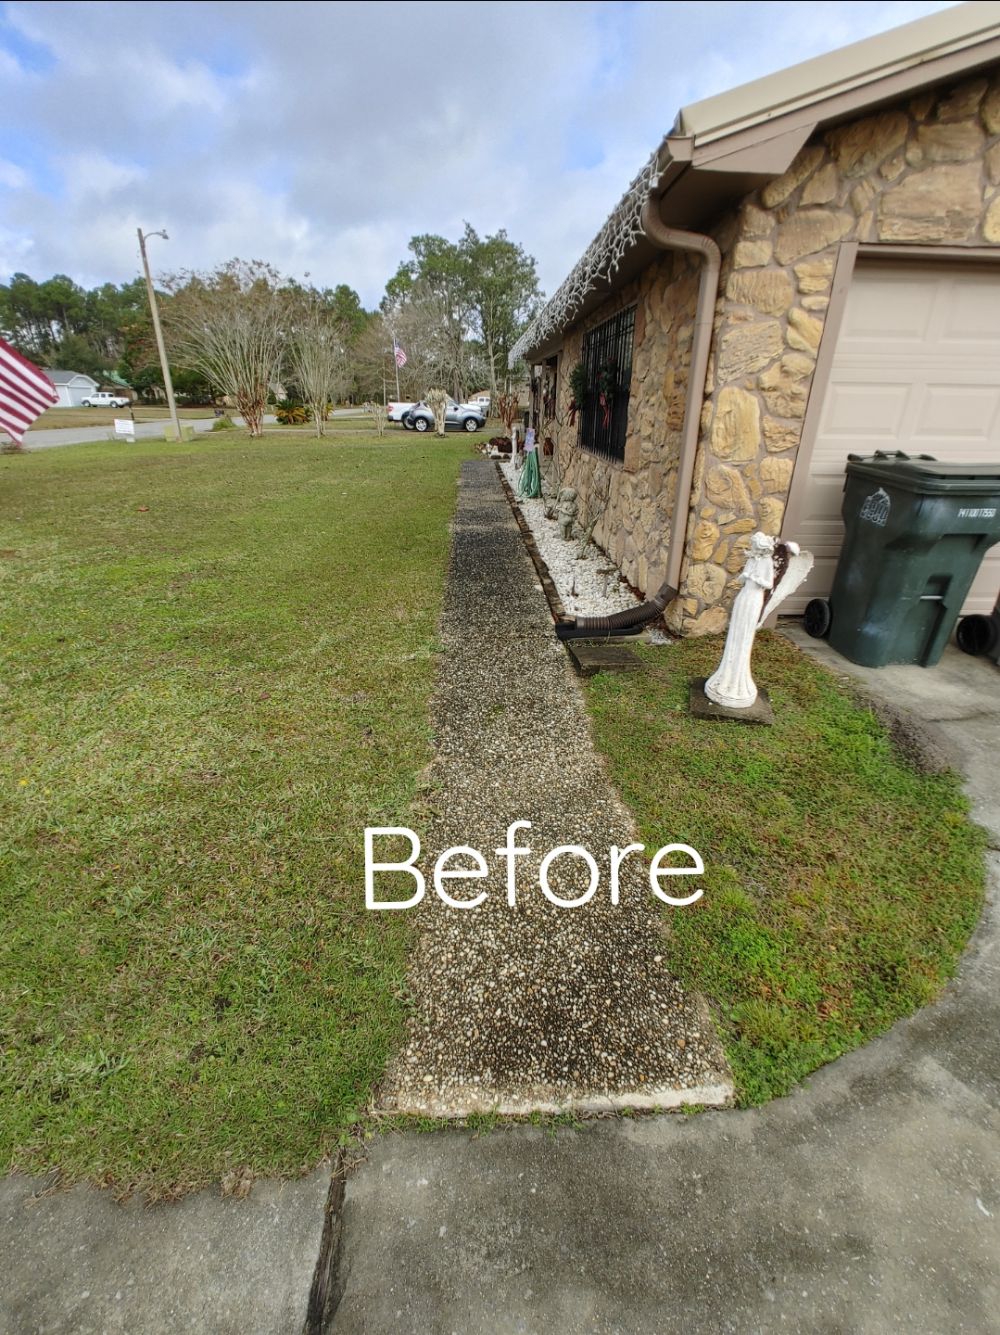 Carport cover driveway patio and sidewalk cleaning in pensacola fl